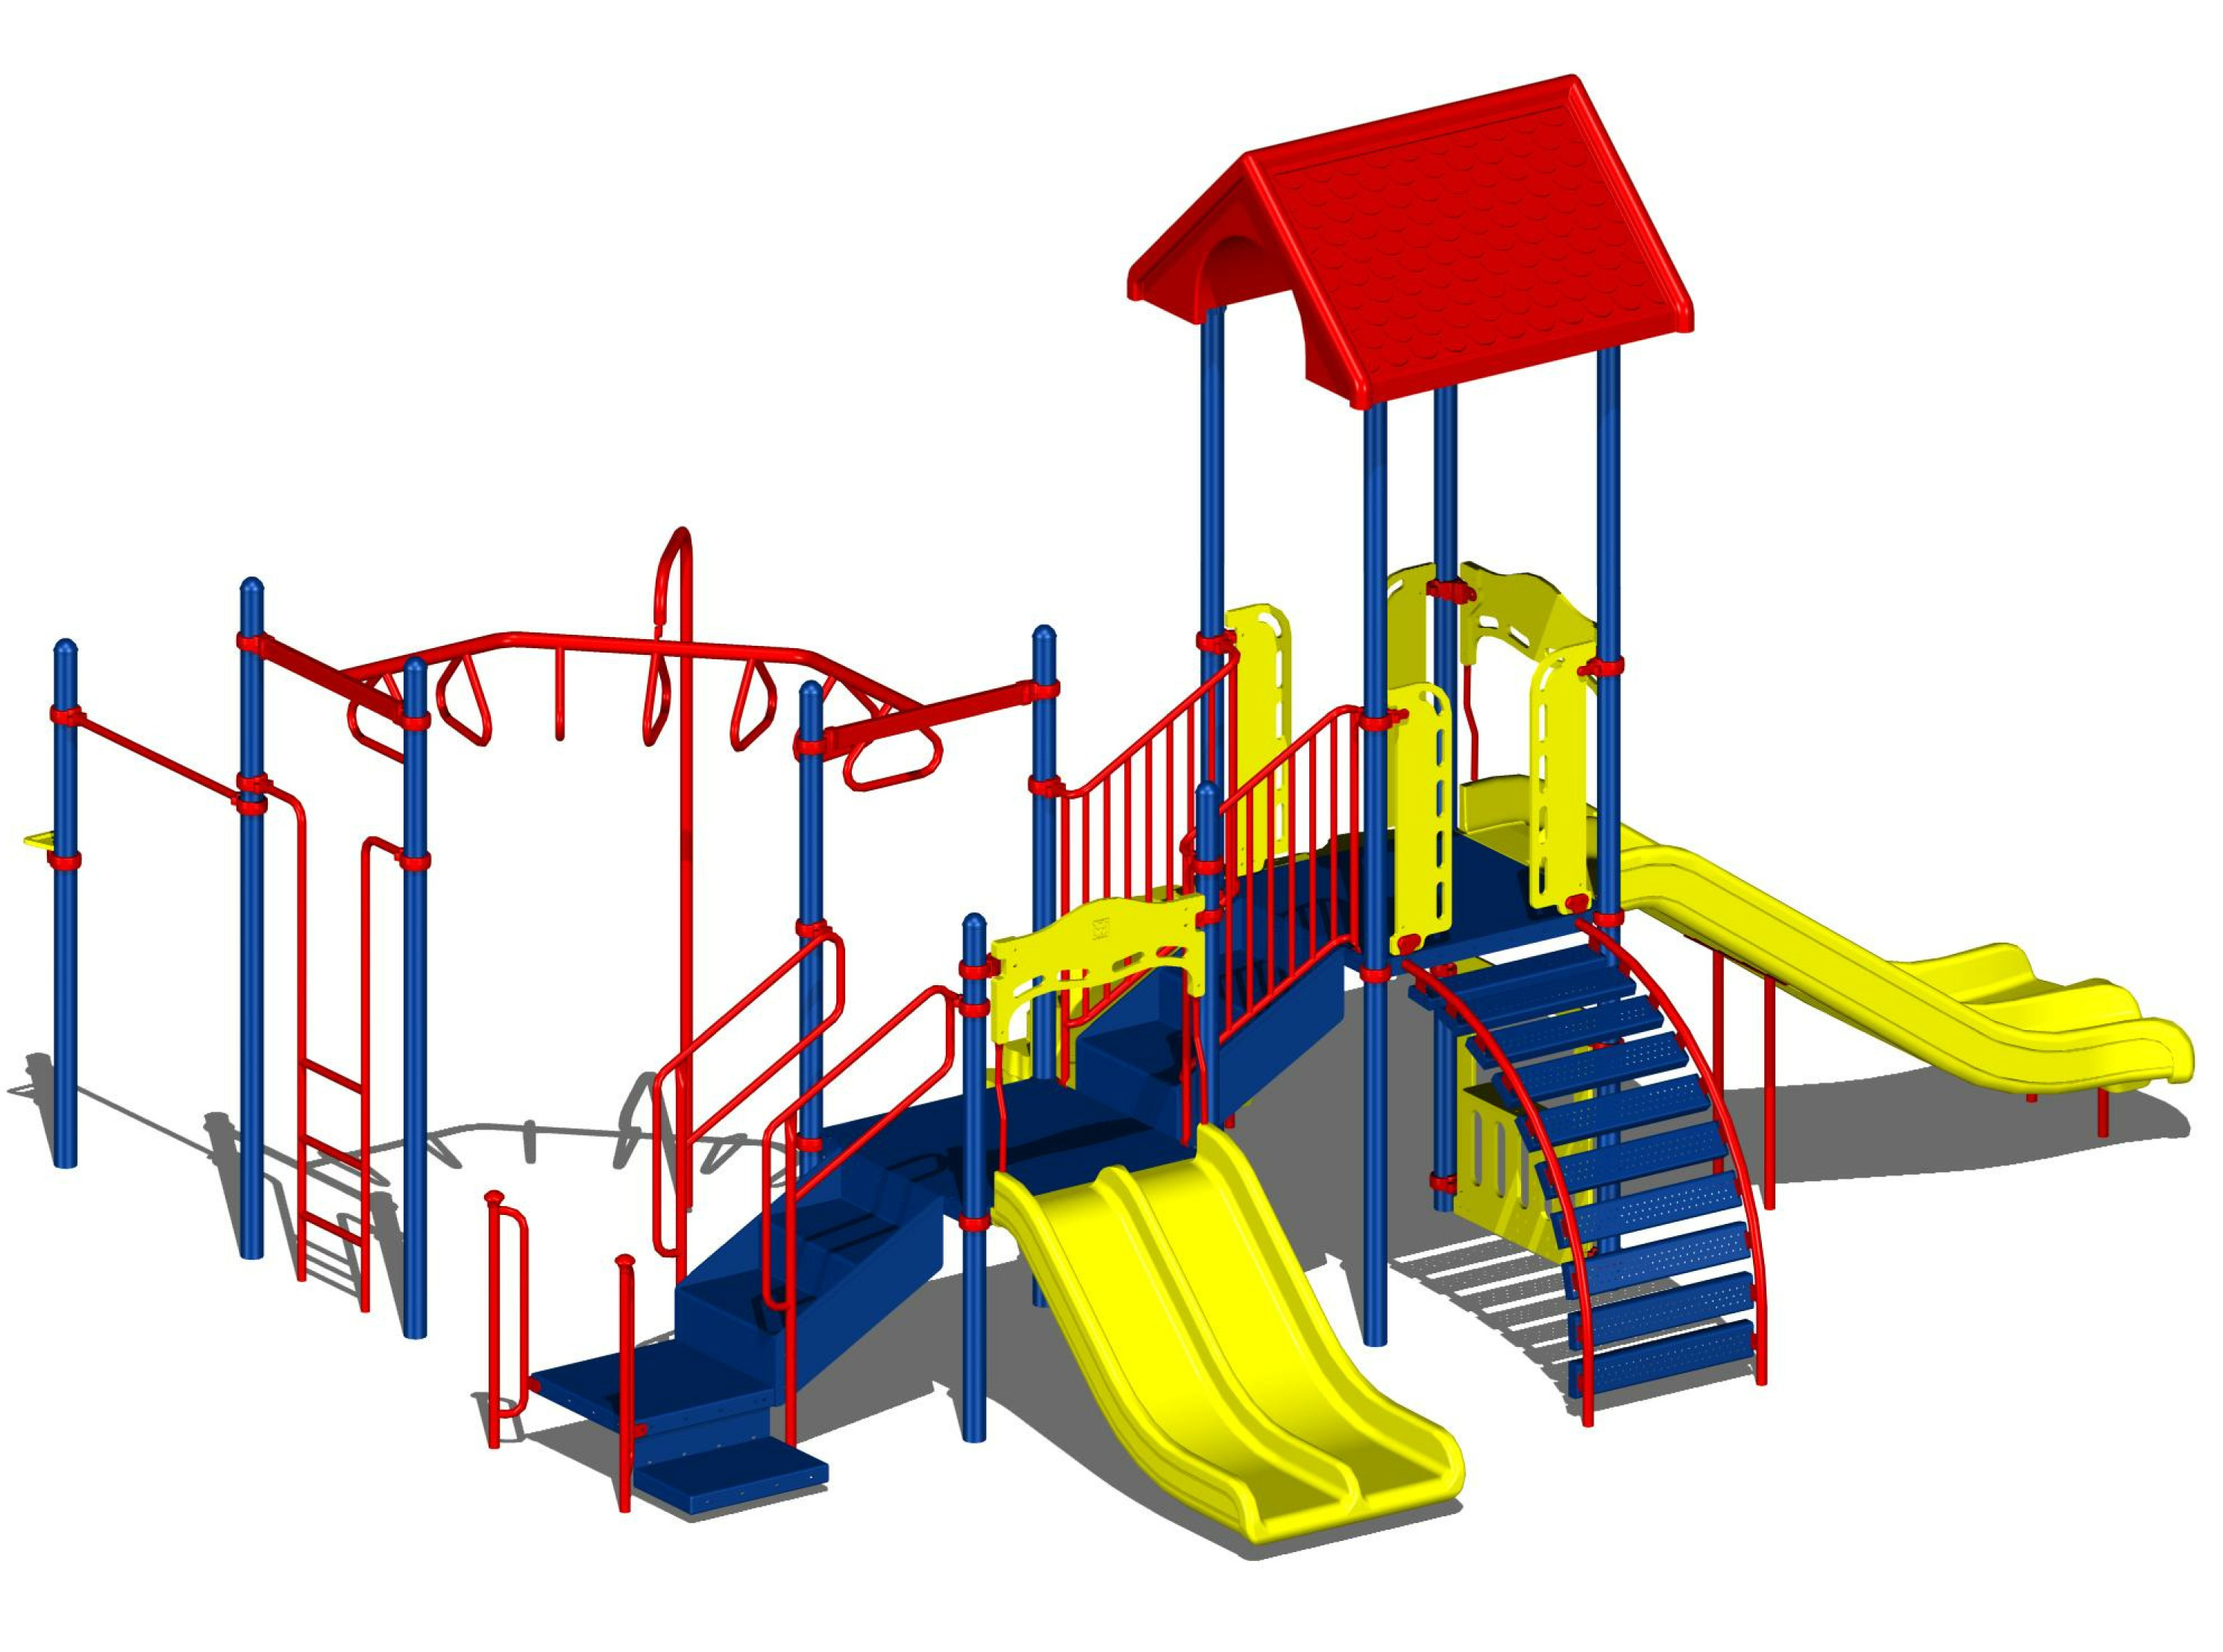 Los Angeles Playground Equipment Company Completes San Diego ...